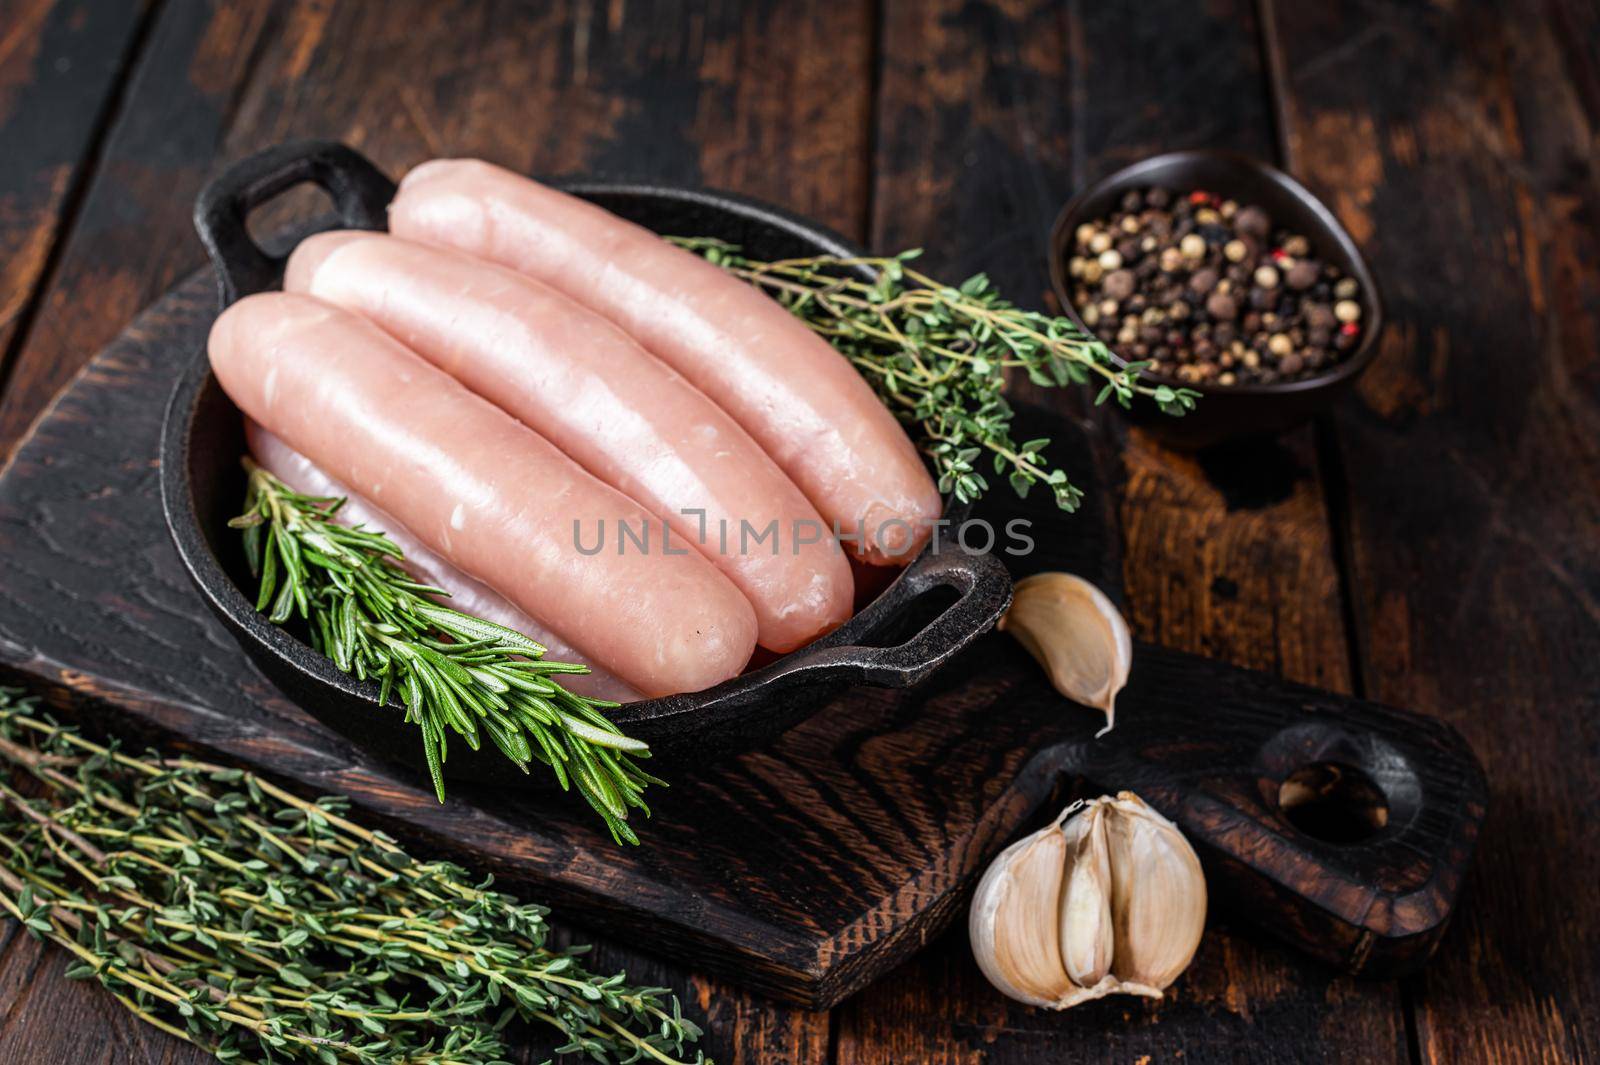 Pork raw sausages in a pan with herbs. Dark wooden background. Top view.